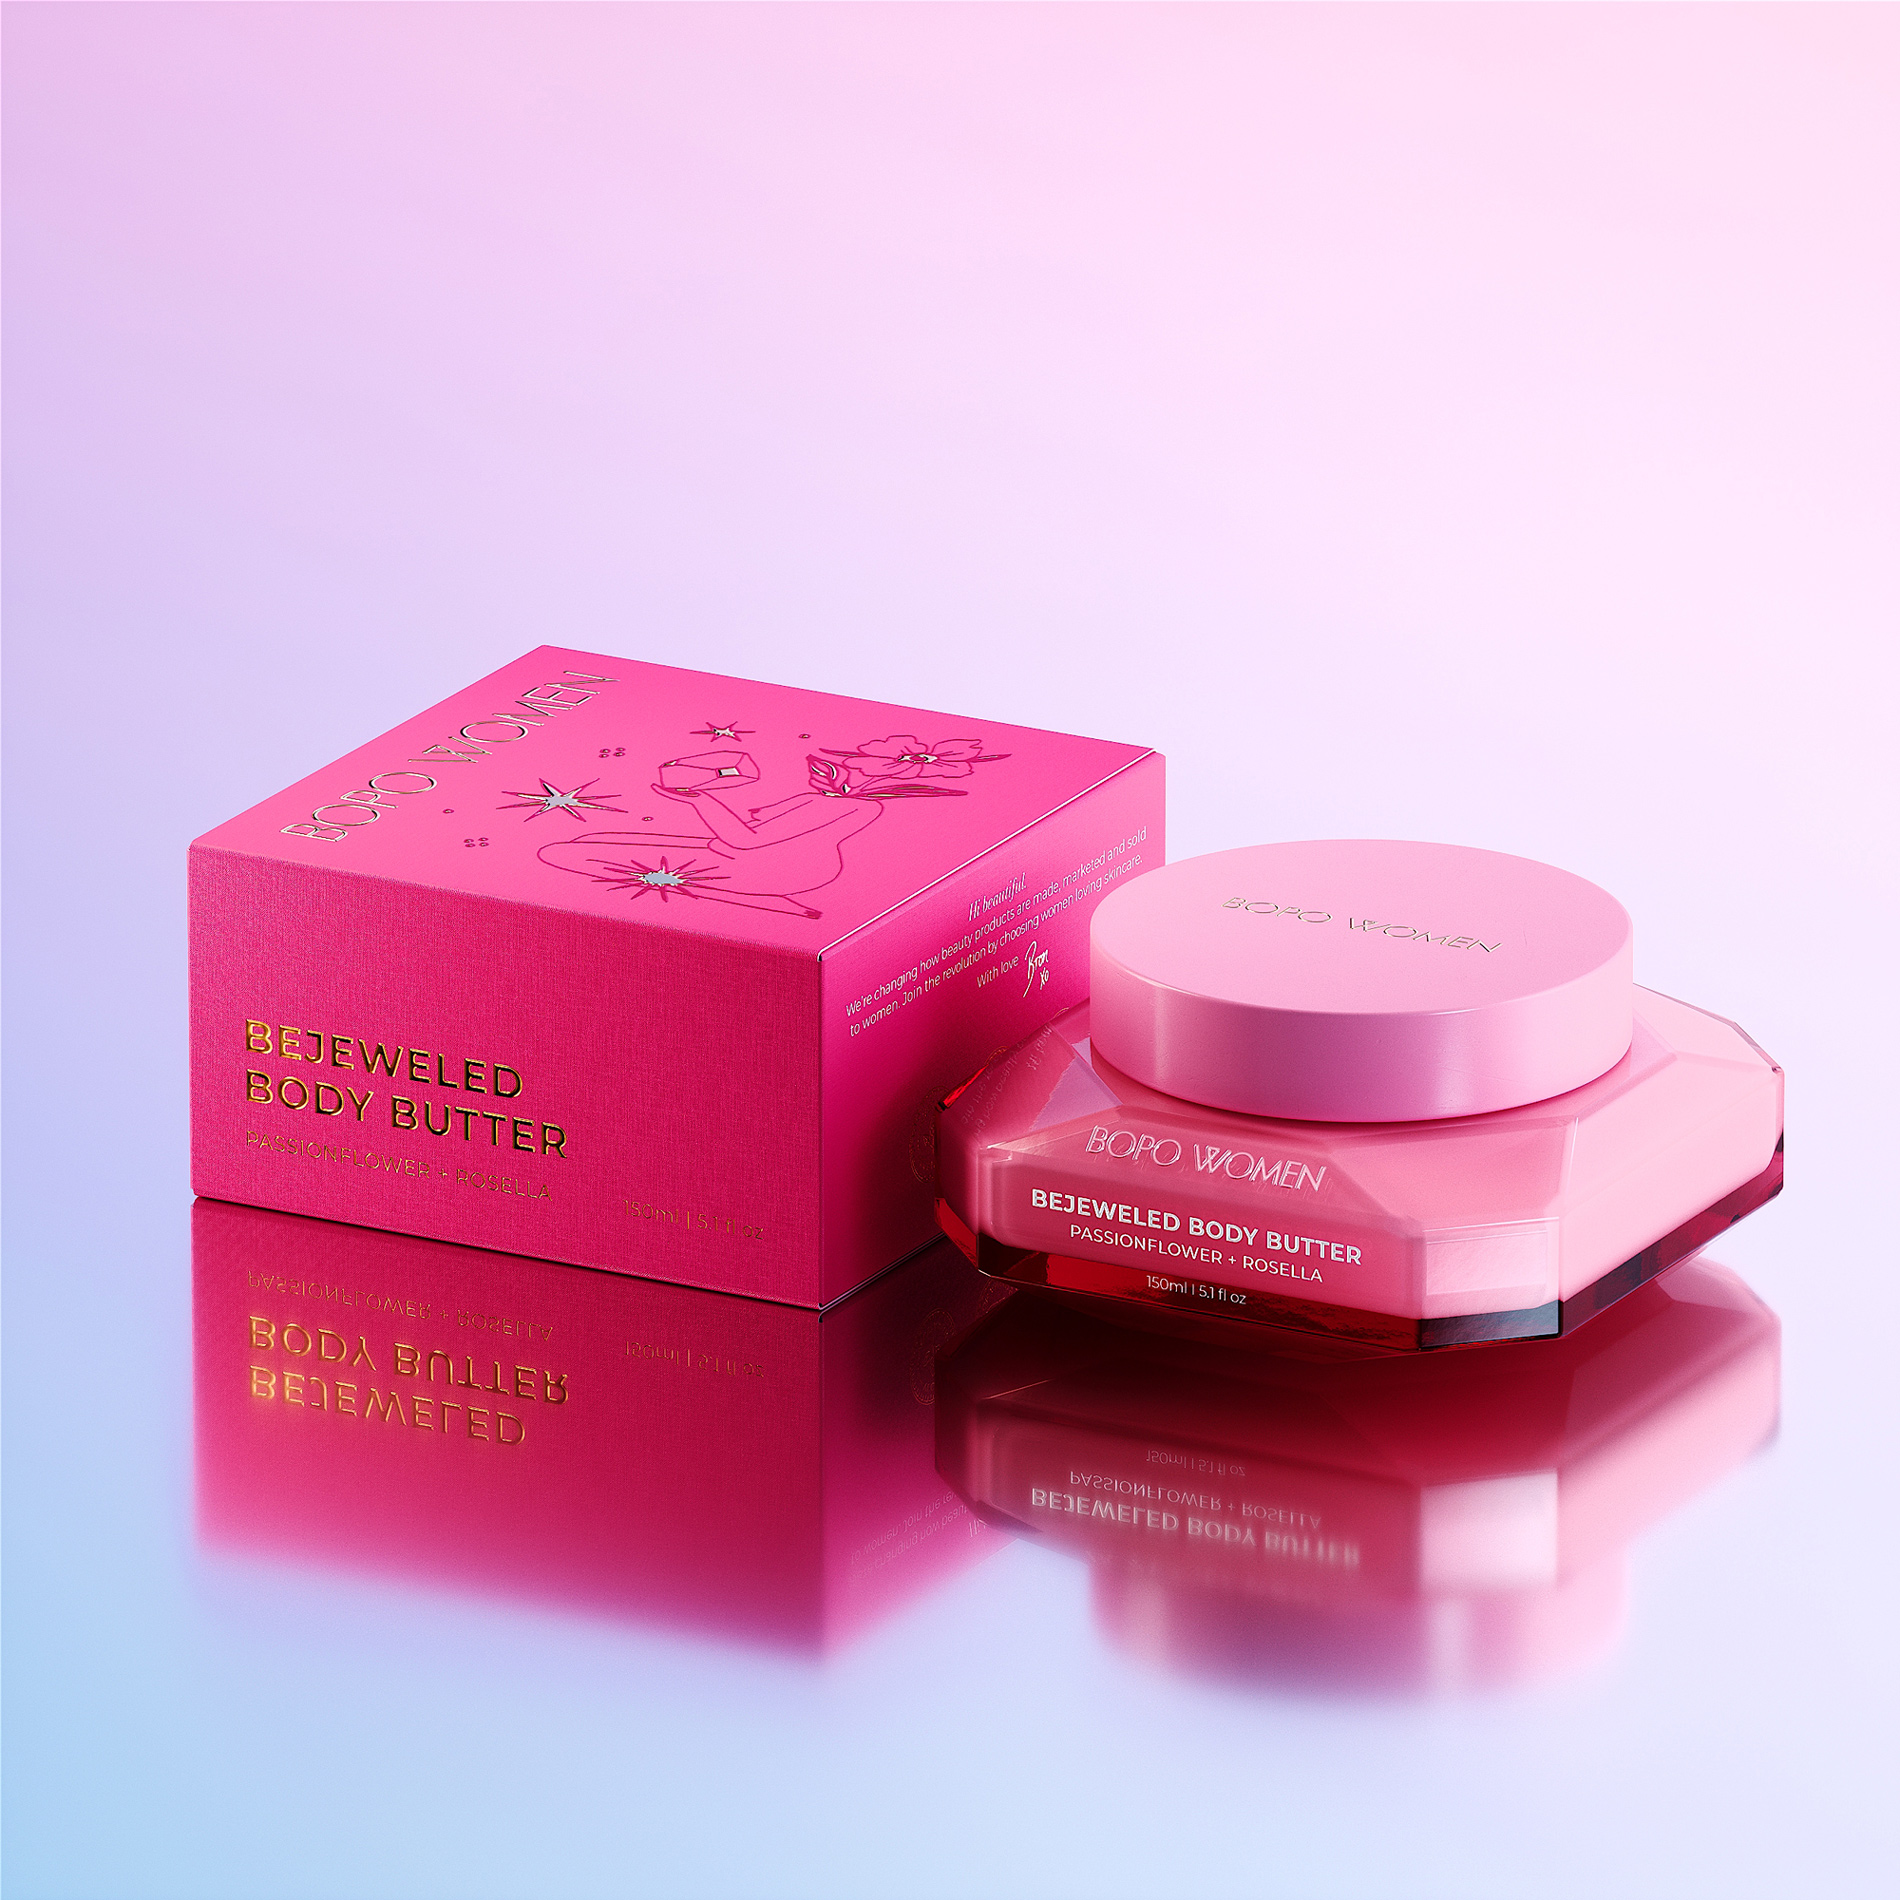 Petitmoulin Studio Unveils Bejeweled Body Butter in Collaboration With Bopo Women, a Radiant Tribute to Self-worth